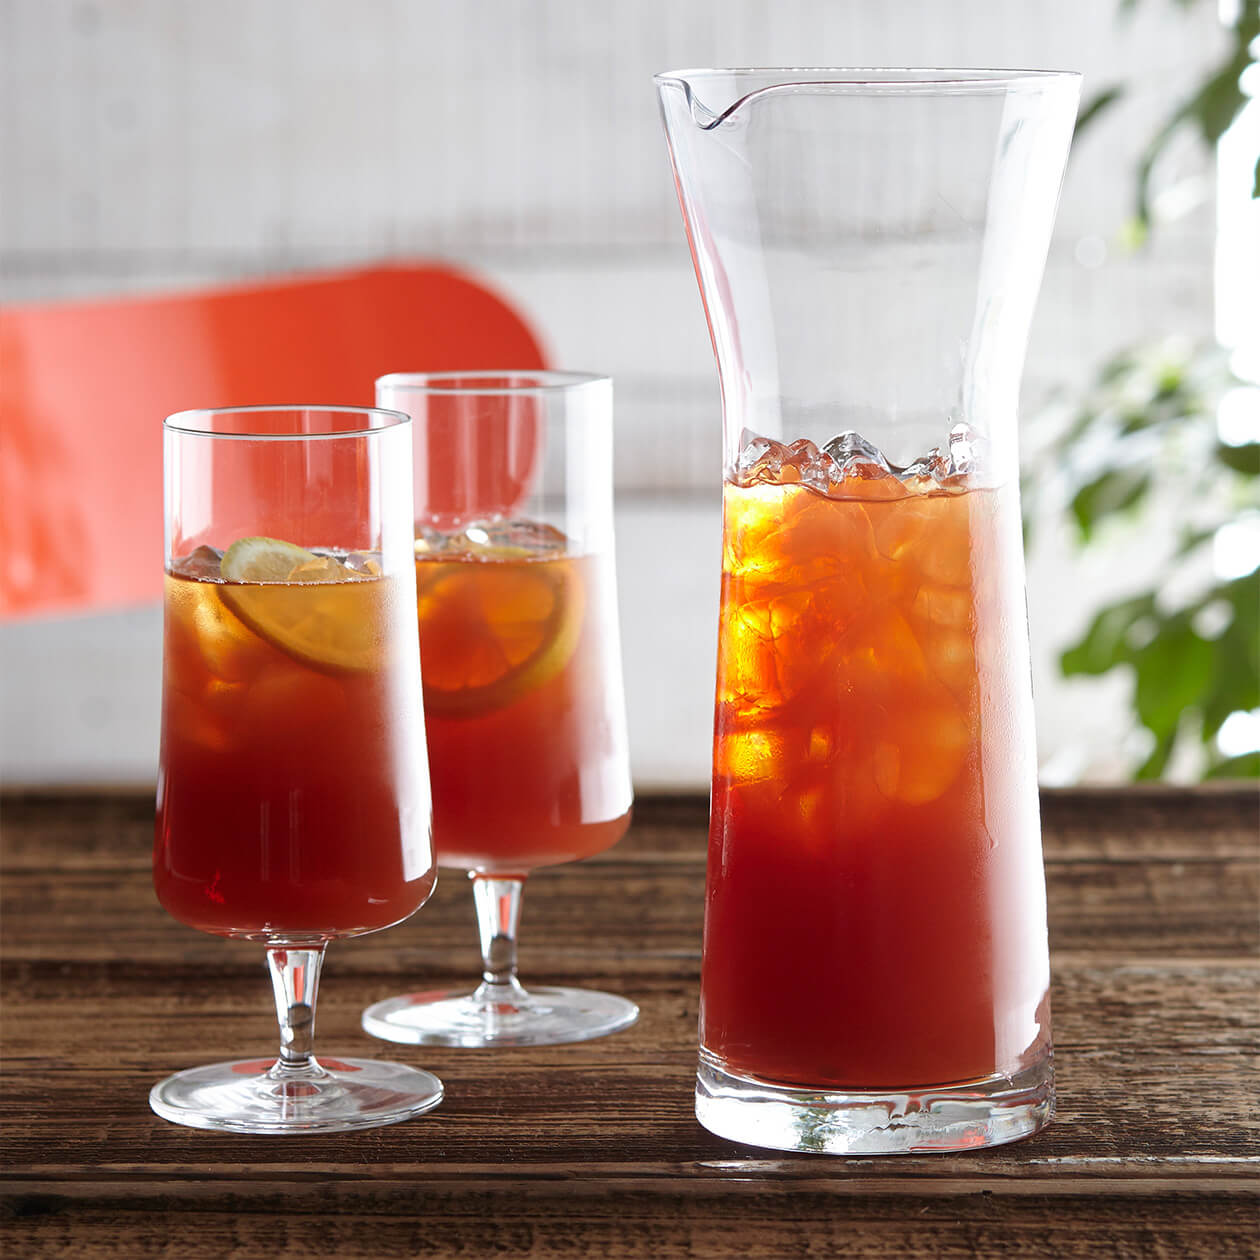 A pitcher of High Mountain Black iced tea served in two glasses with lemon in a cafe setting